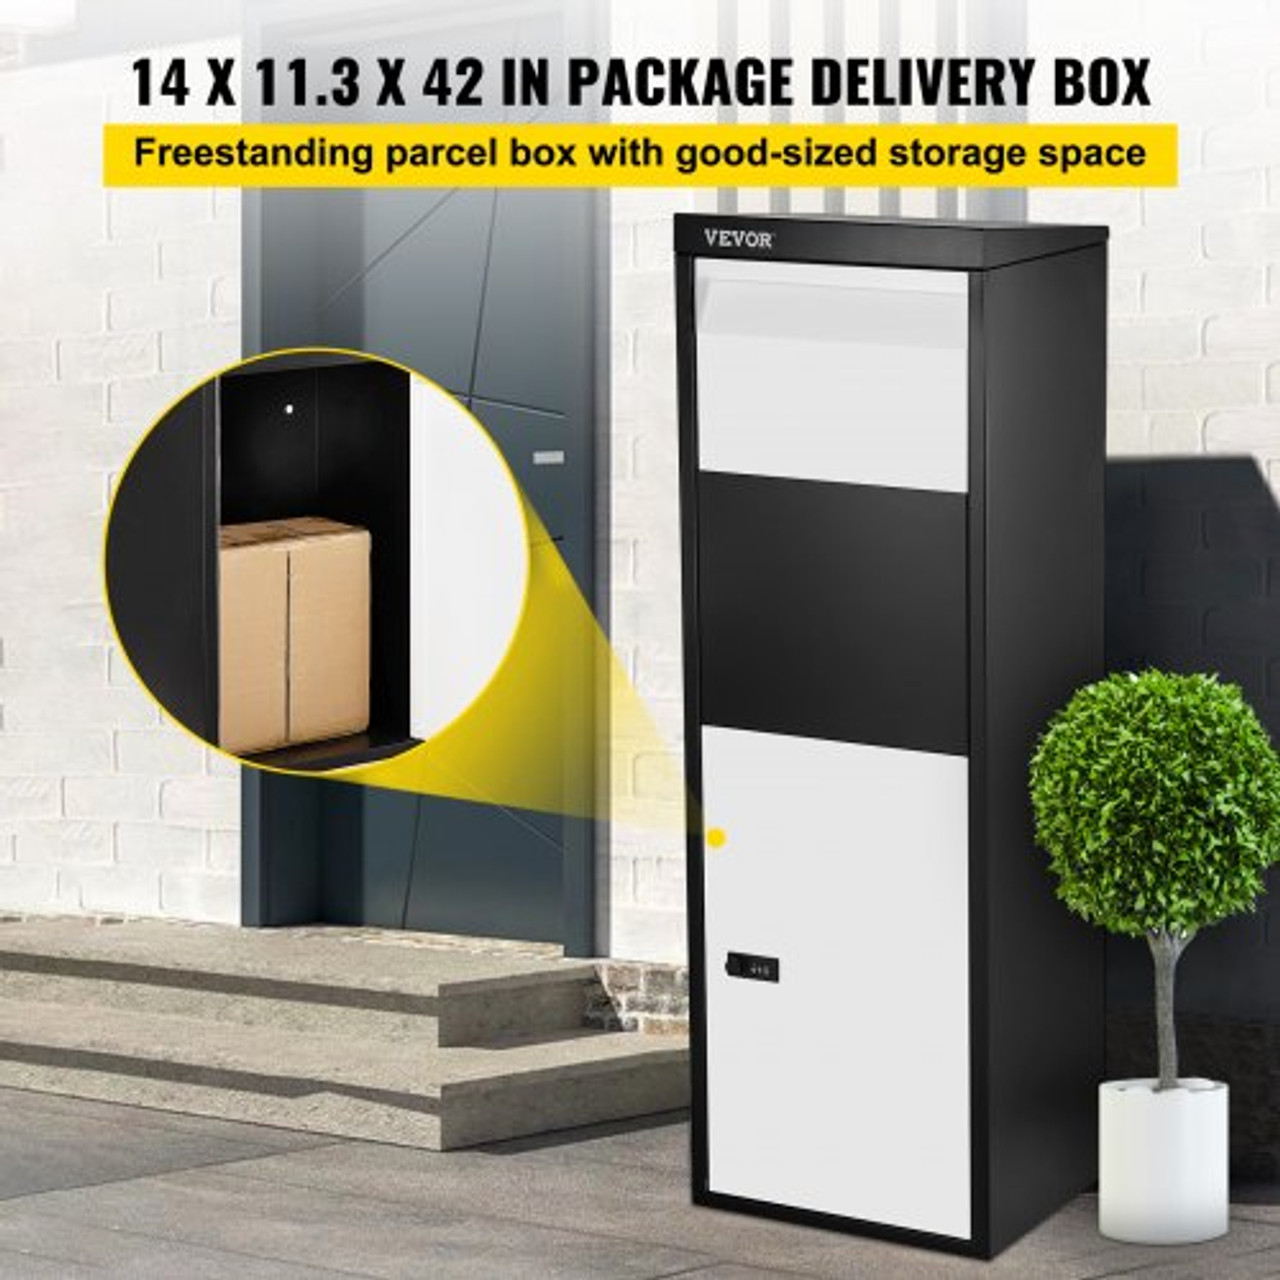 Package Delivery Box, 14'' x 11.3'' x 42'' Galvanized Steel Parcel Mailbox w/Code Lock & Mounting Hardware, for Outdoor Porch, Curbside, Large, x11.3''x42'', Black and White